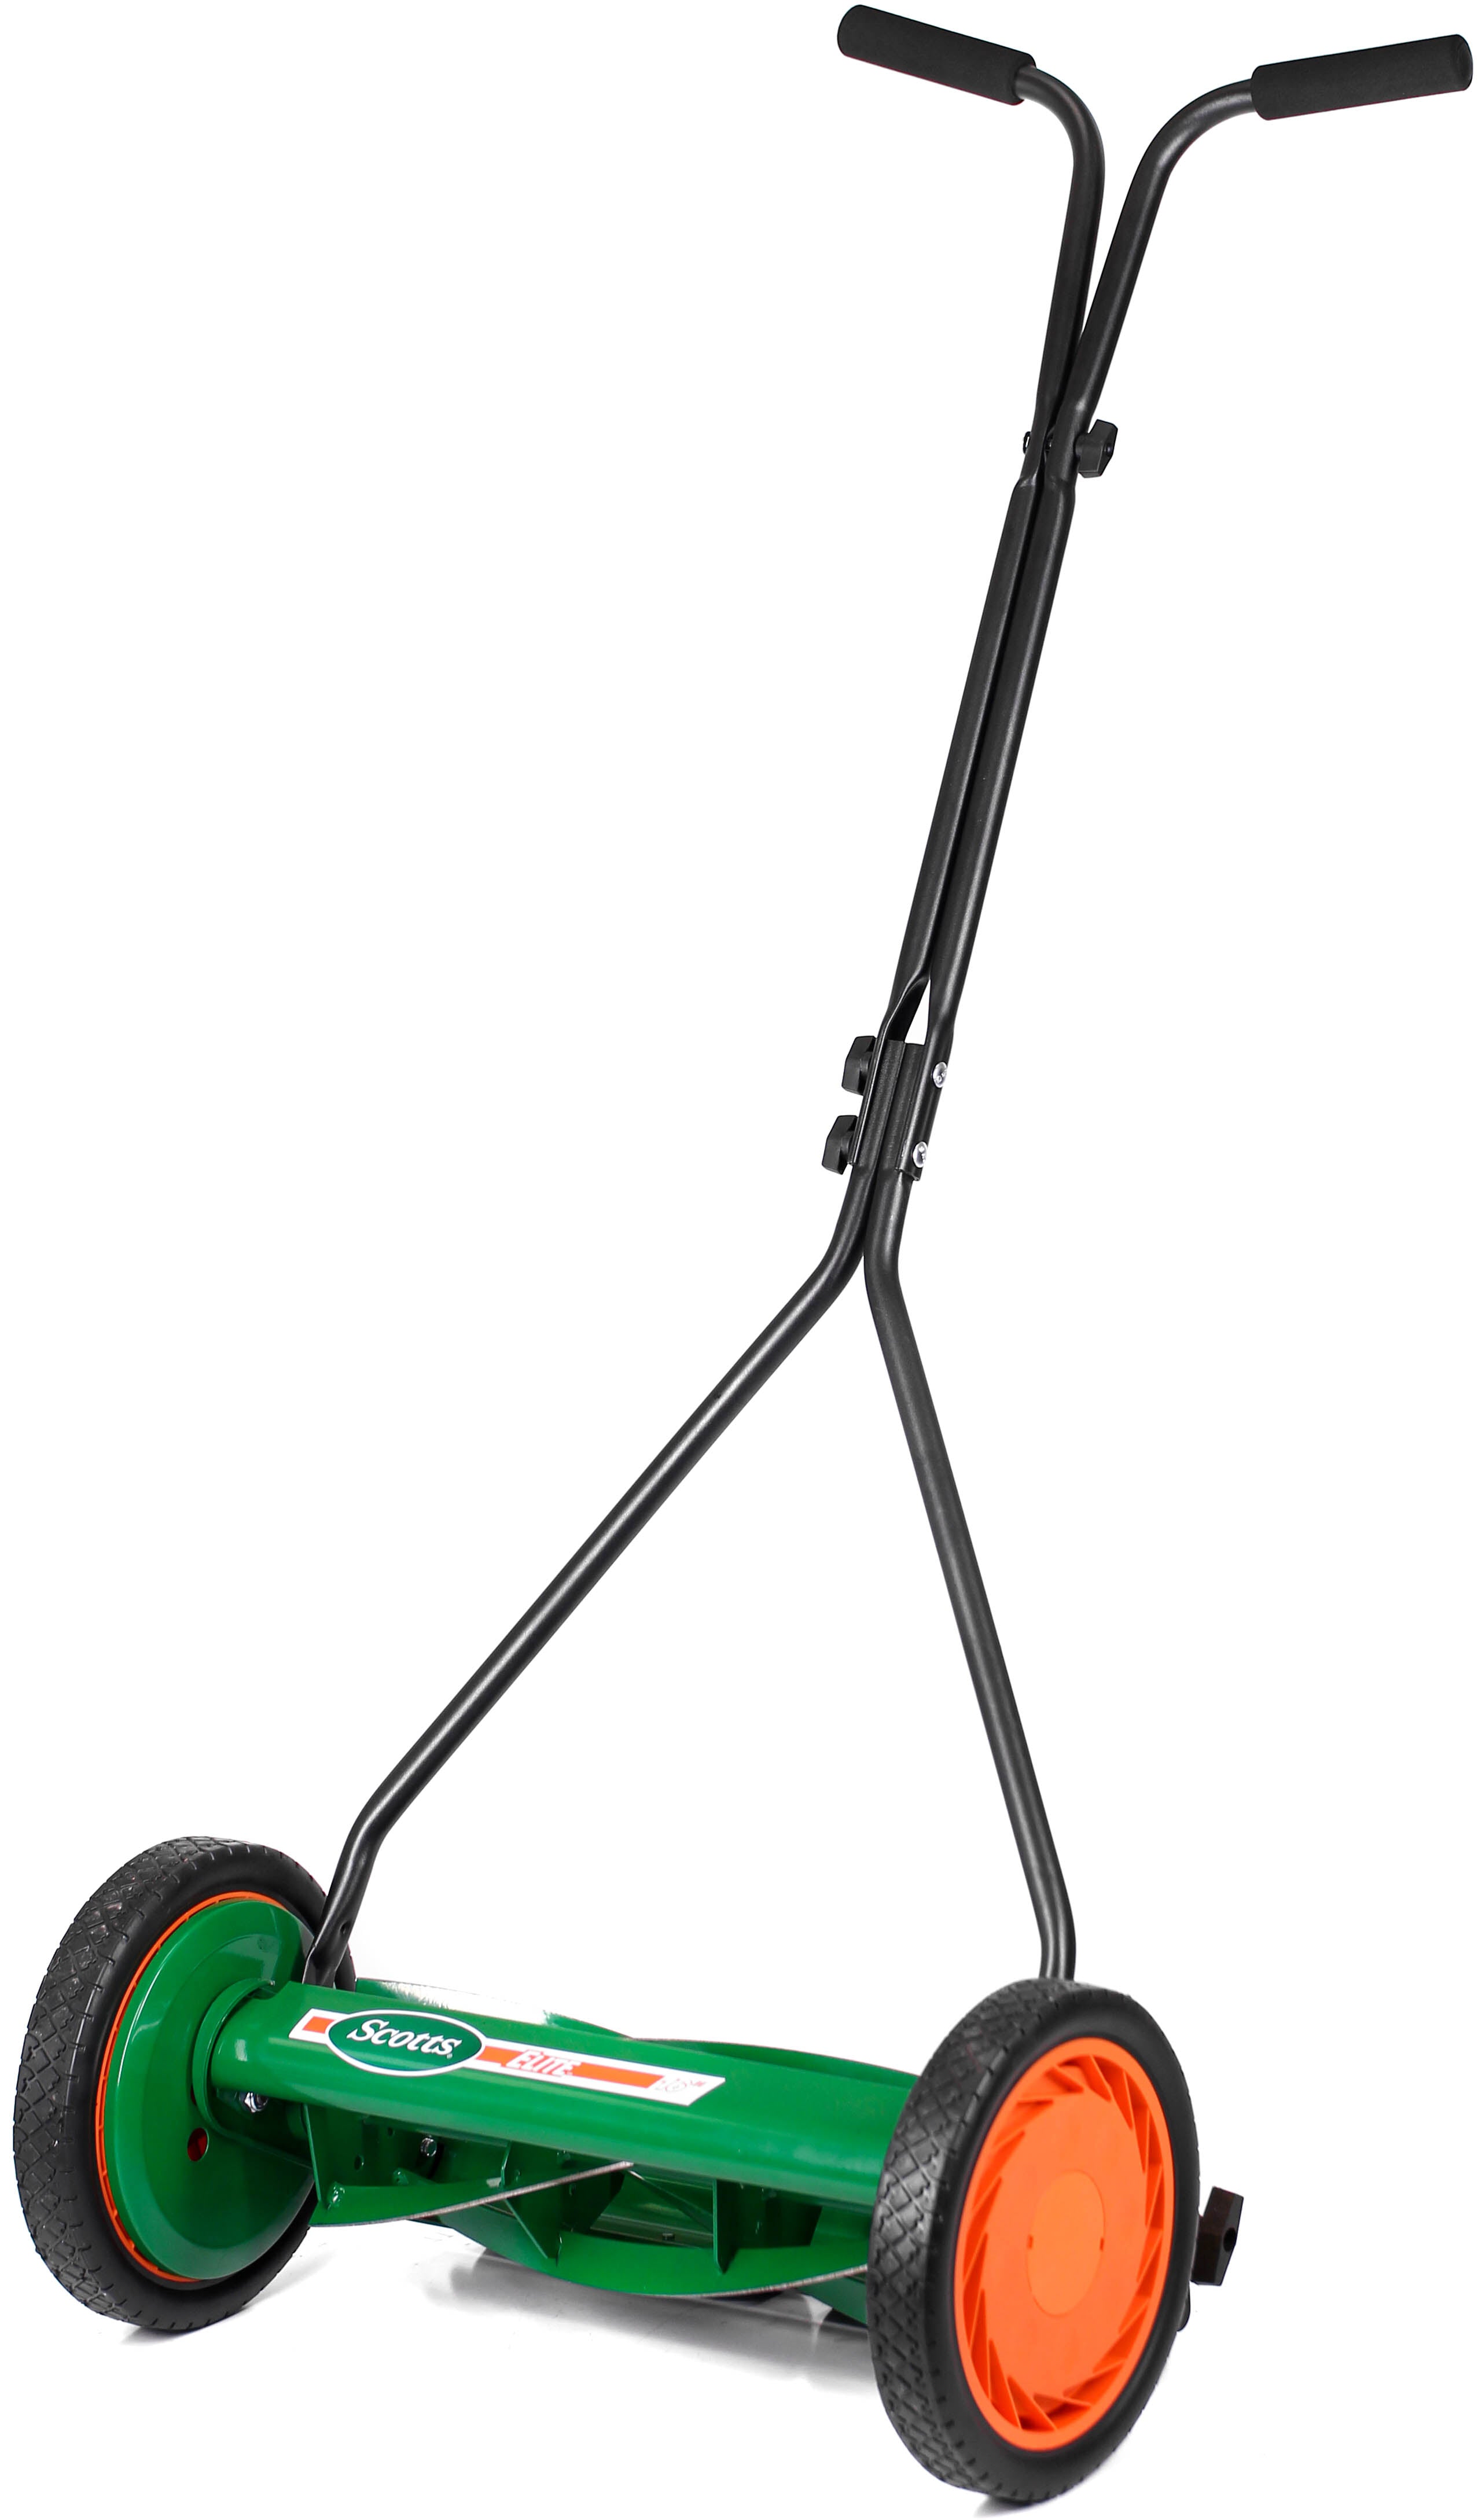 Earthwise 16 Manual 7 Blade Reel Mower for Bent Grass